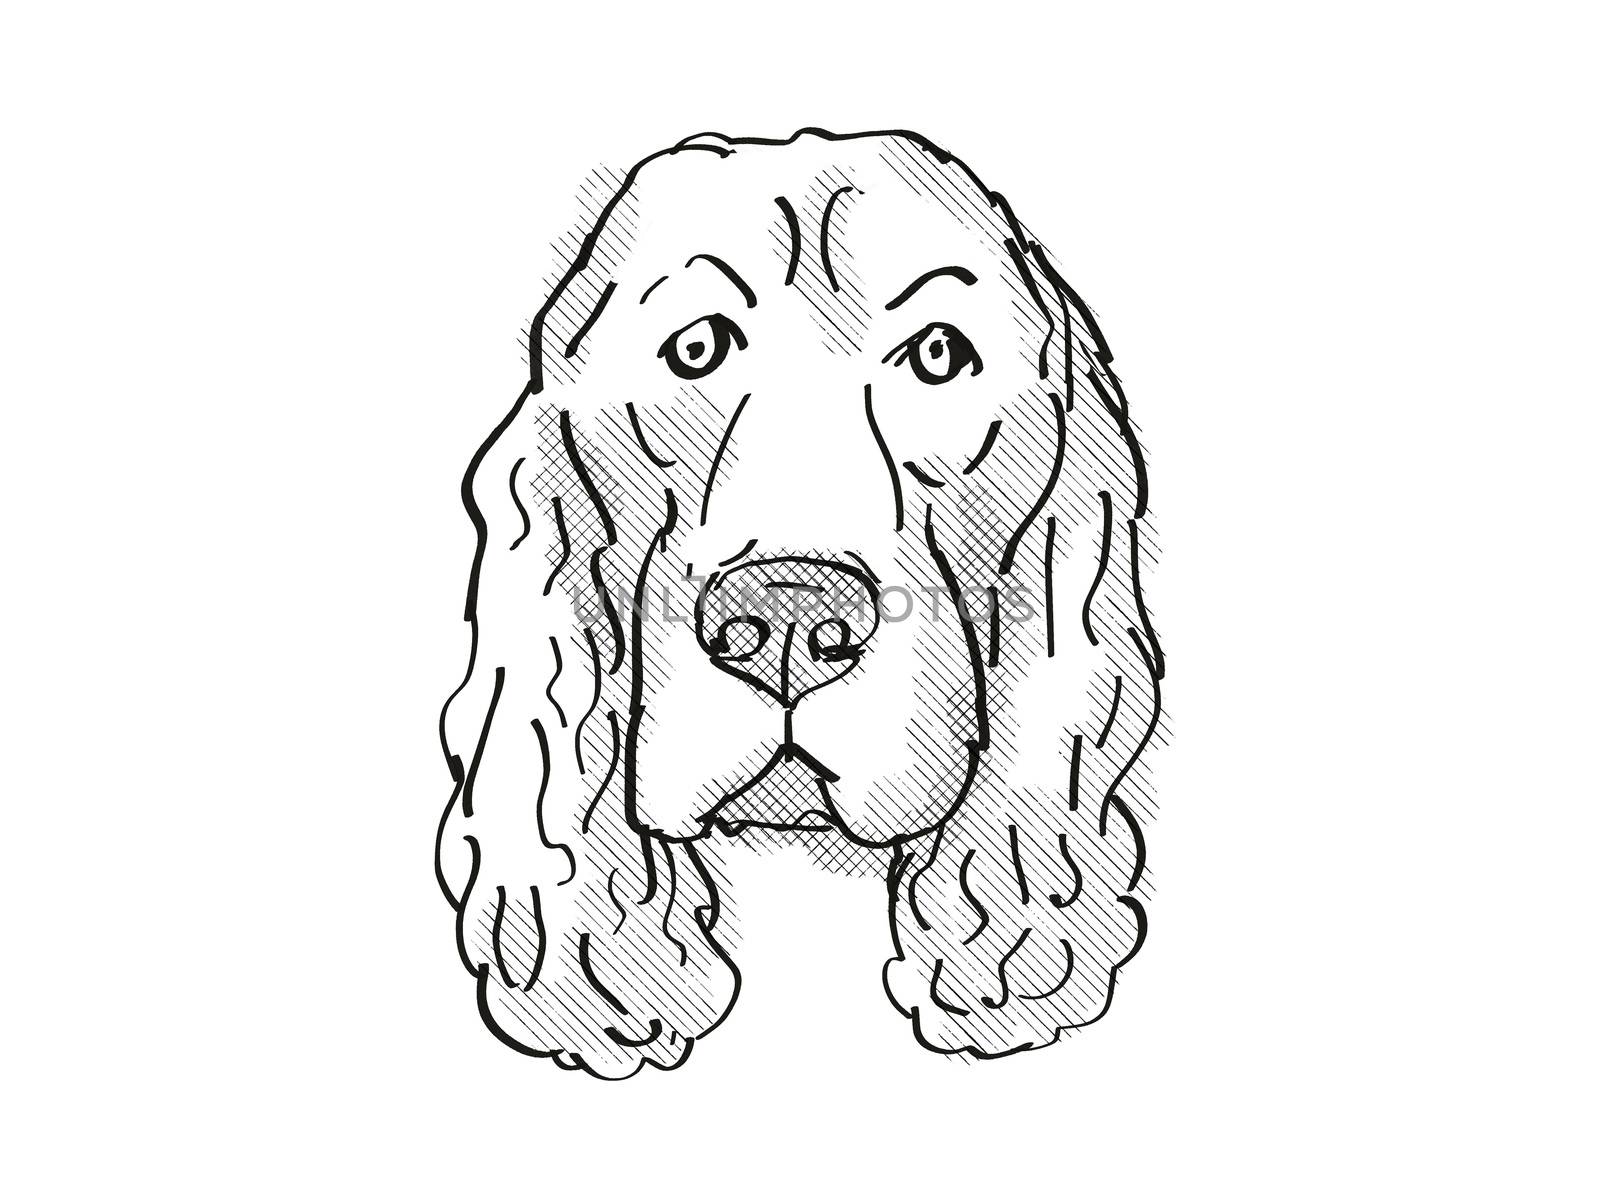 Retro cartoon style drawing of head of a Field Spaniel, a domestic dog or canine breed on isolated white background done in black and white.